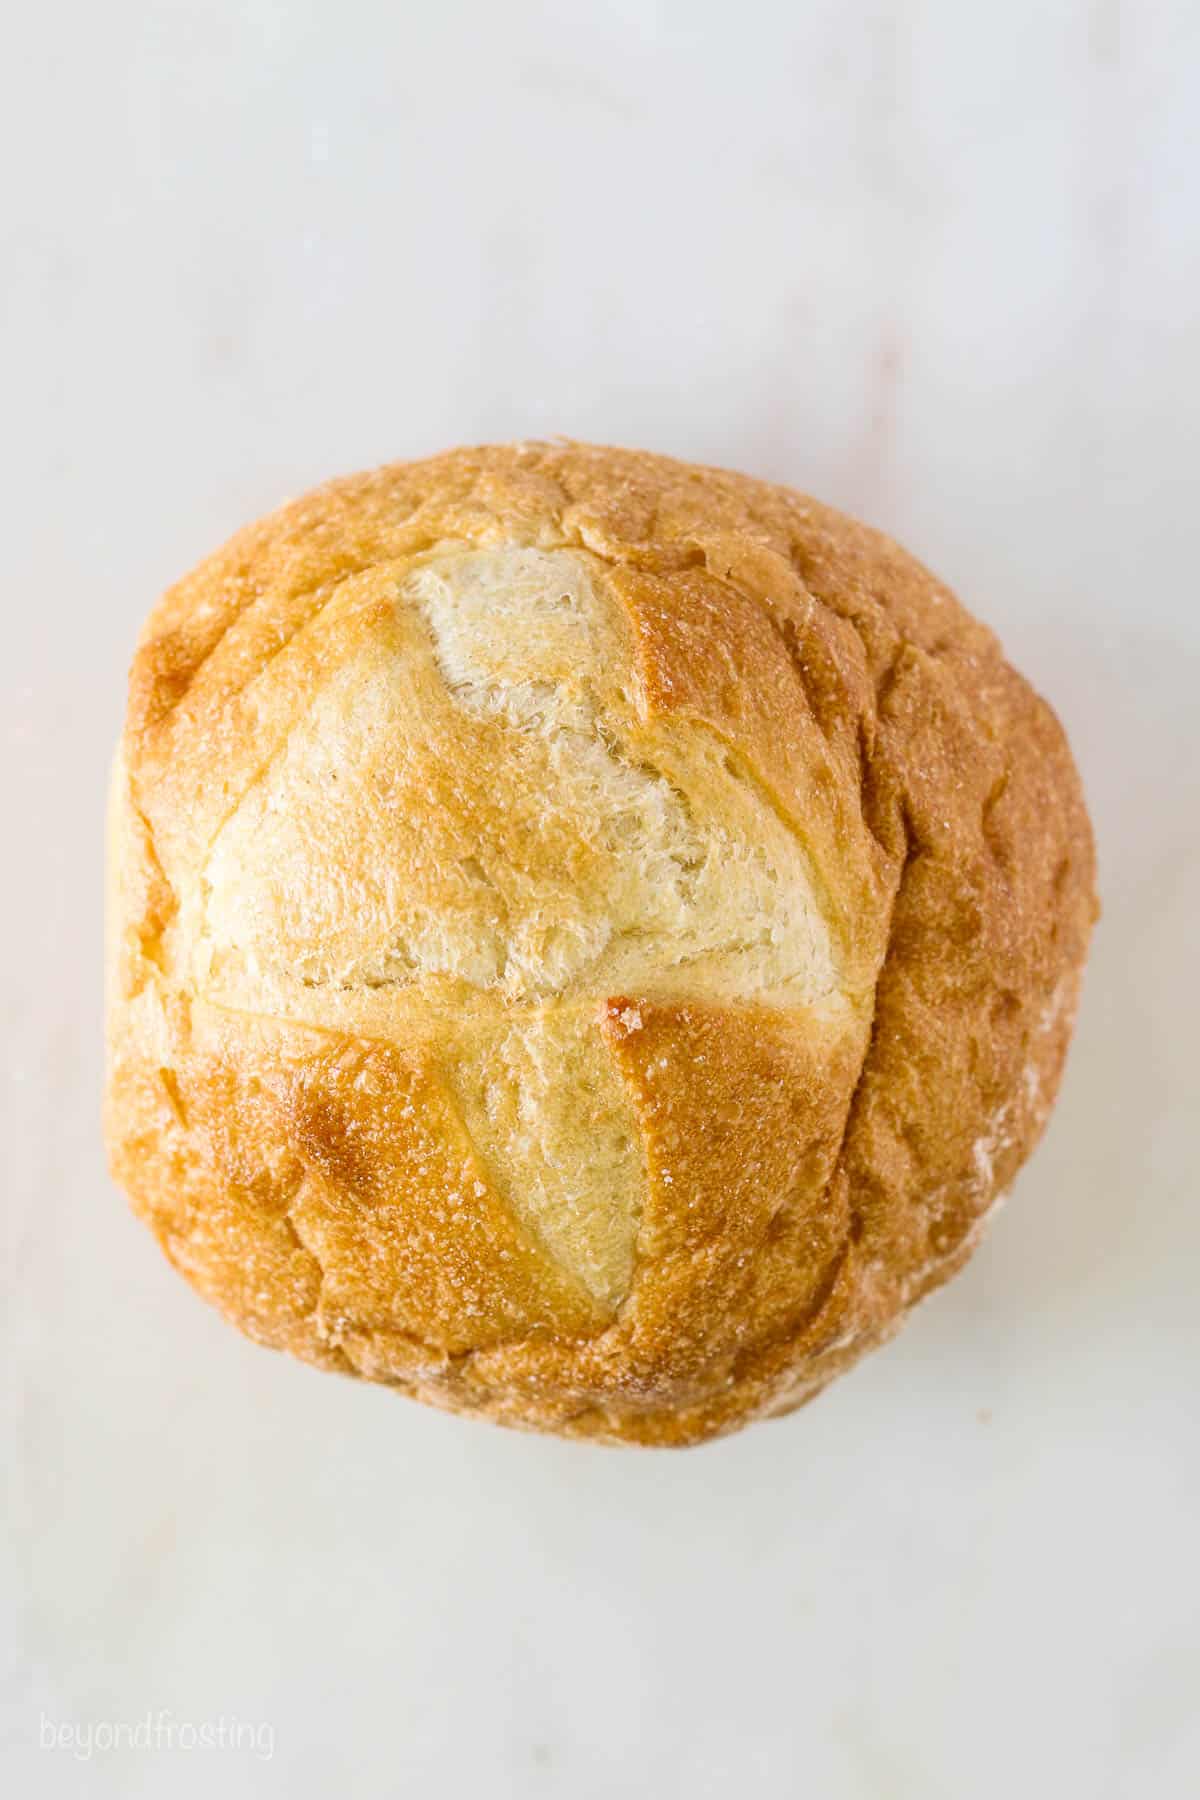 Overhead view of a round loaf of bread